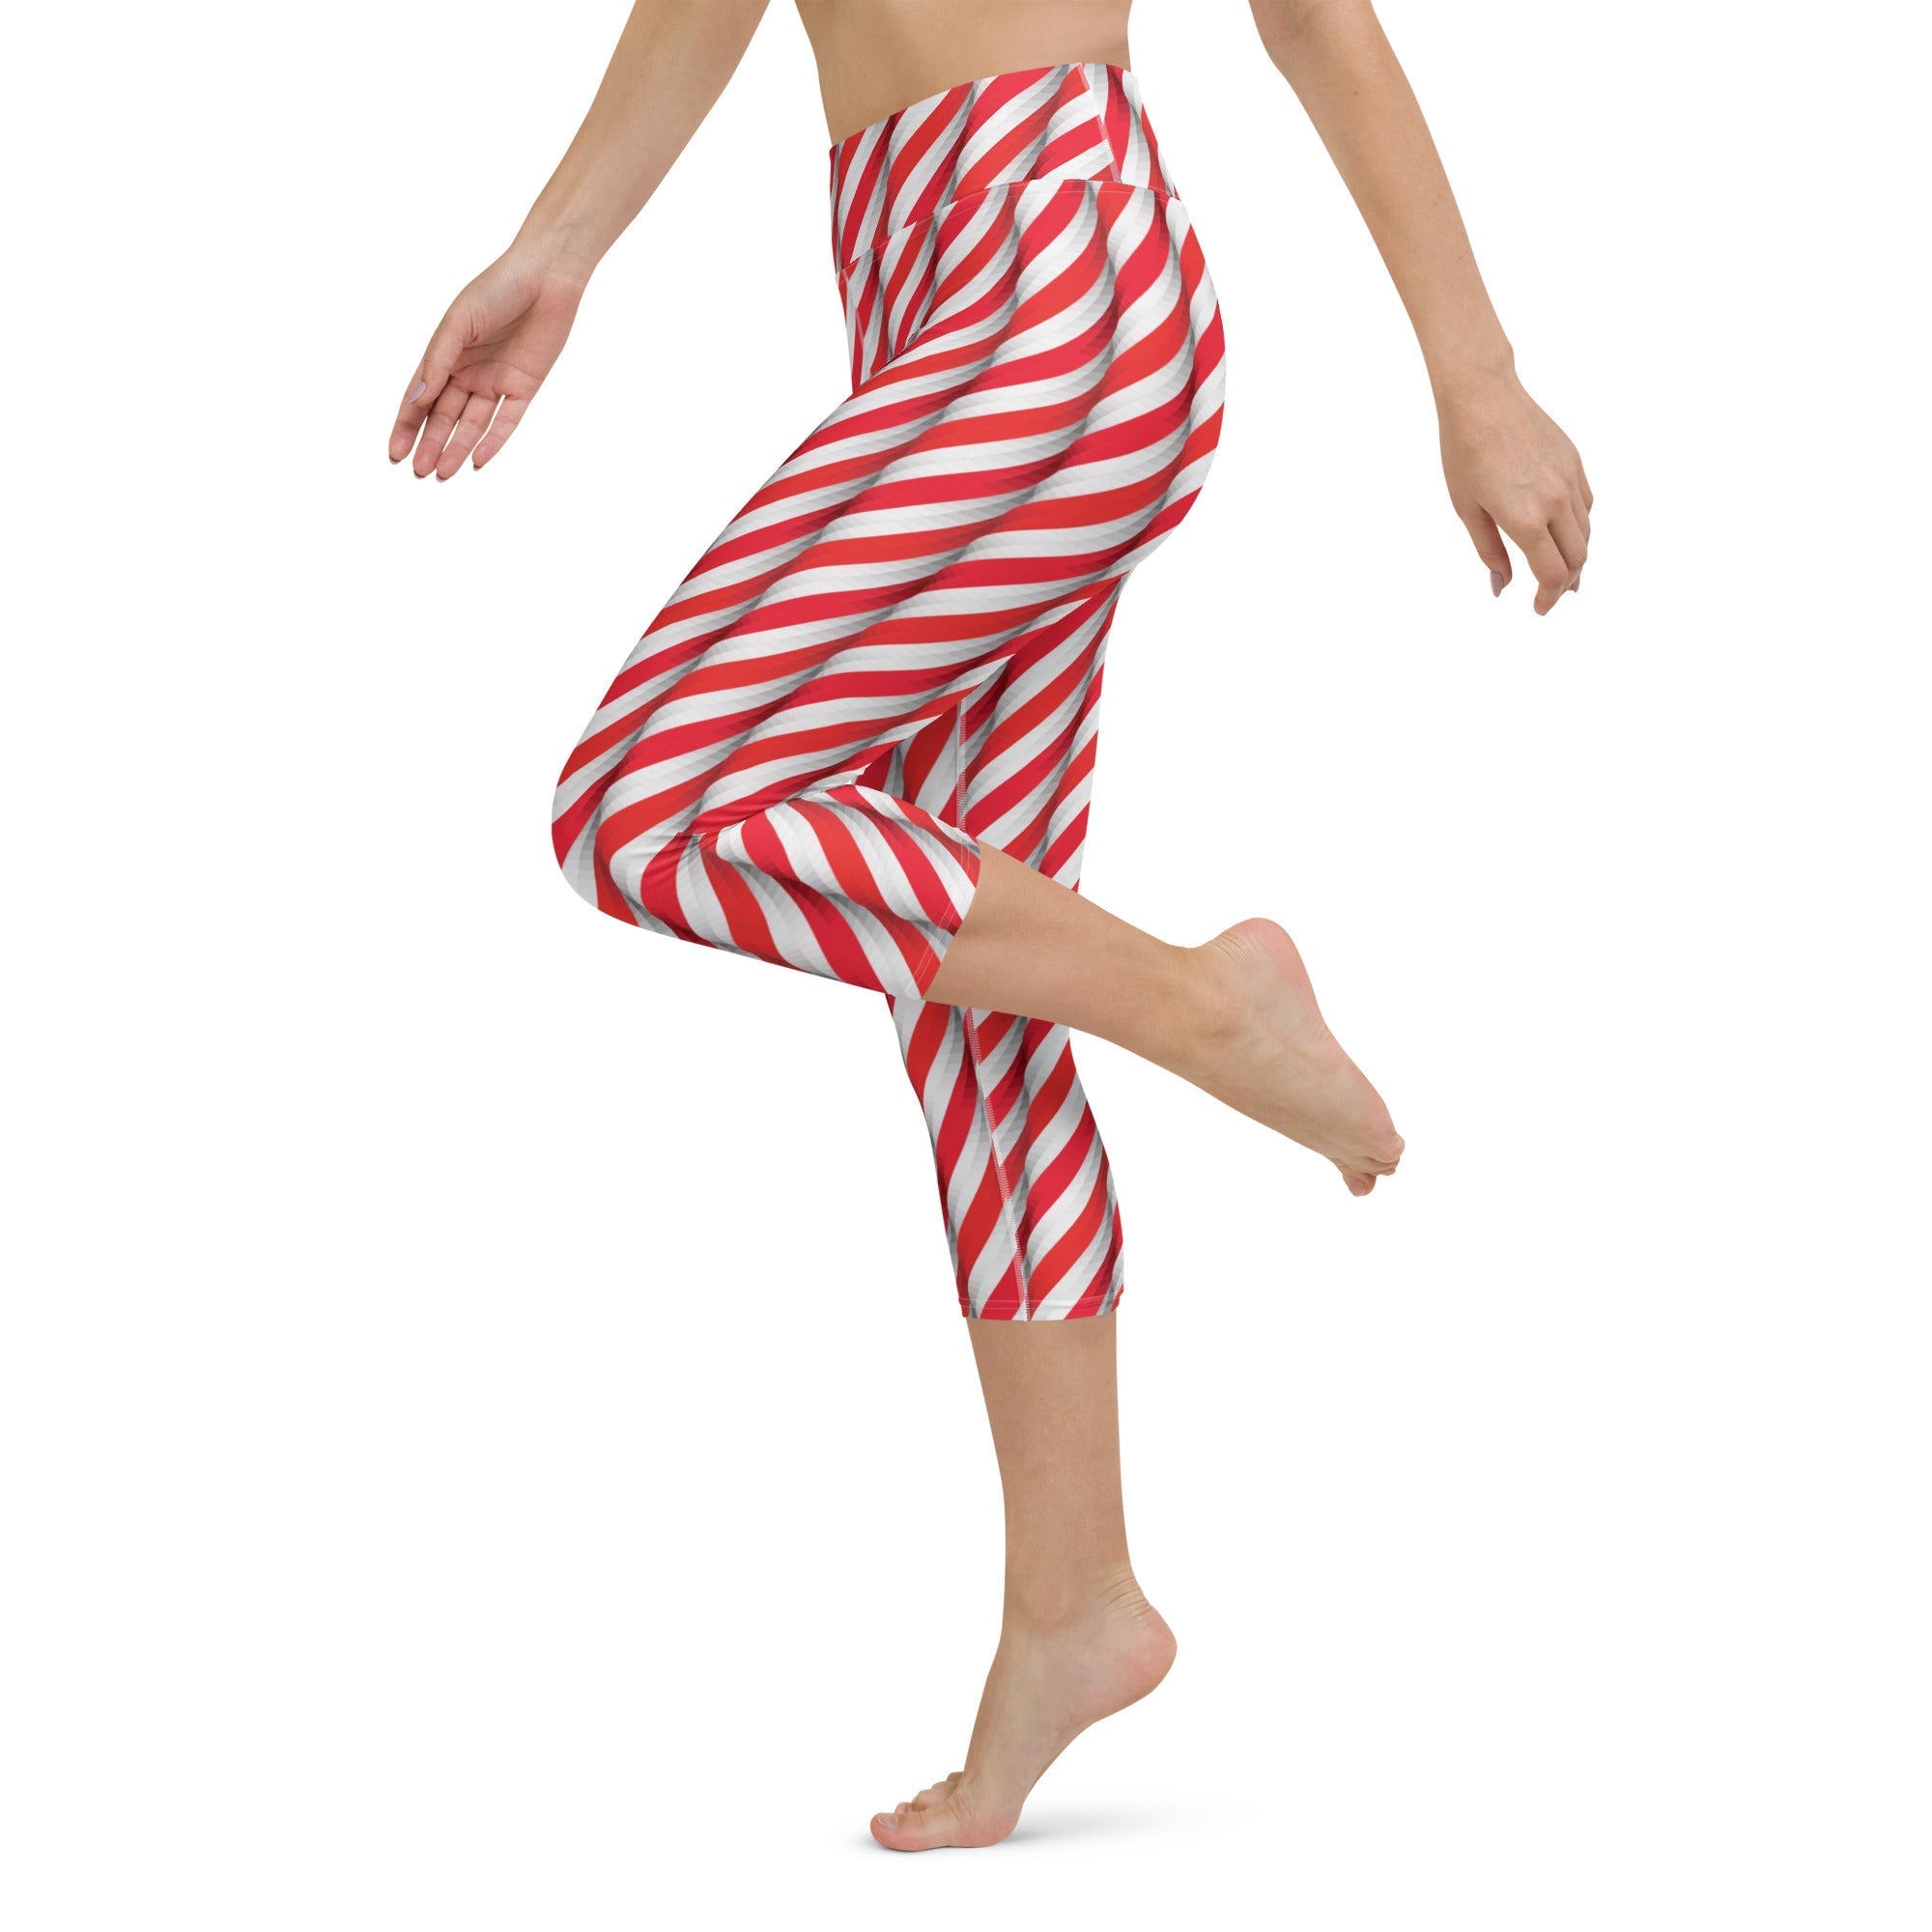 Real Candy Cane Yoga Capris